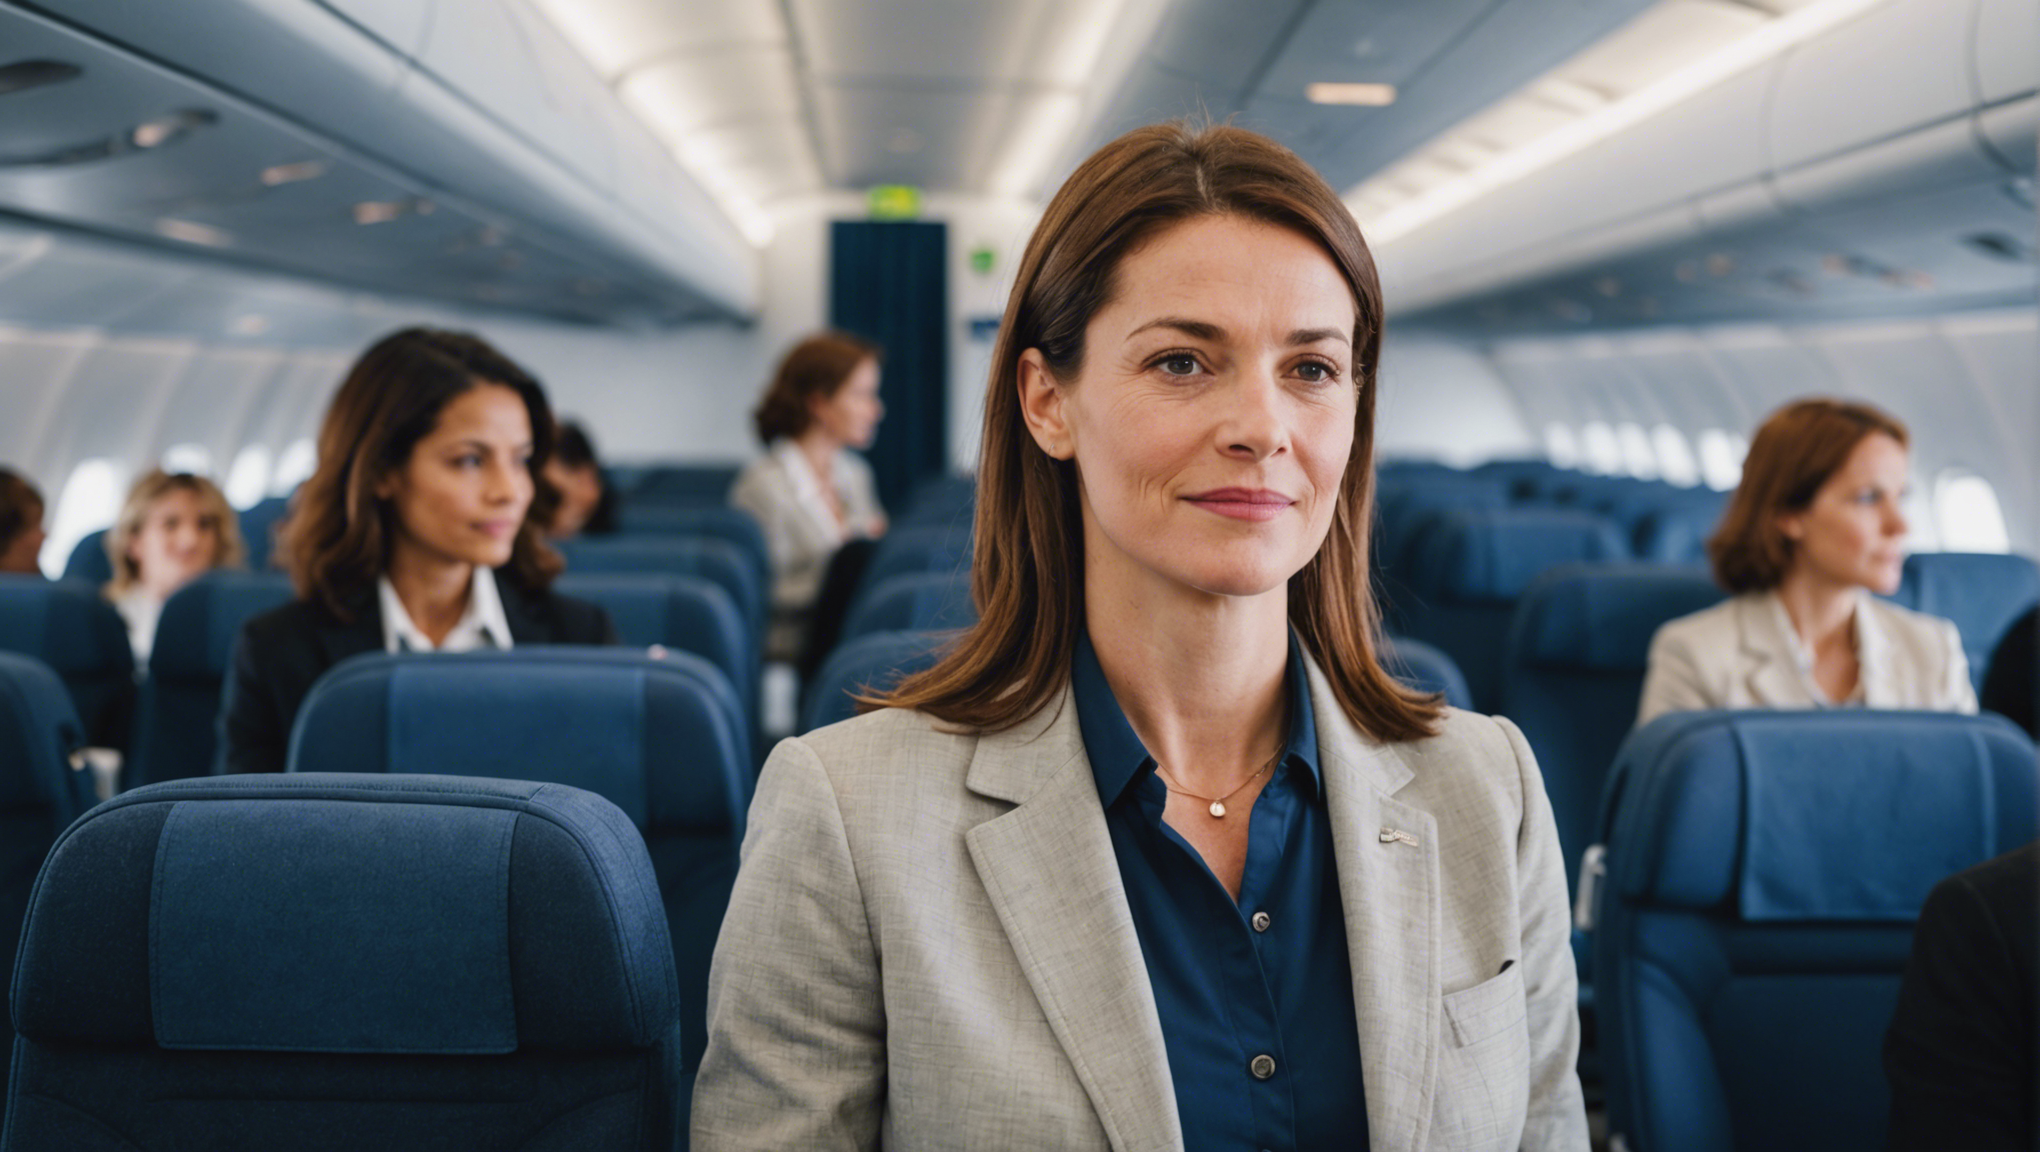 discover how women account for 51% of air passengers in france and play an essential role in french aviation.